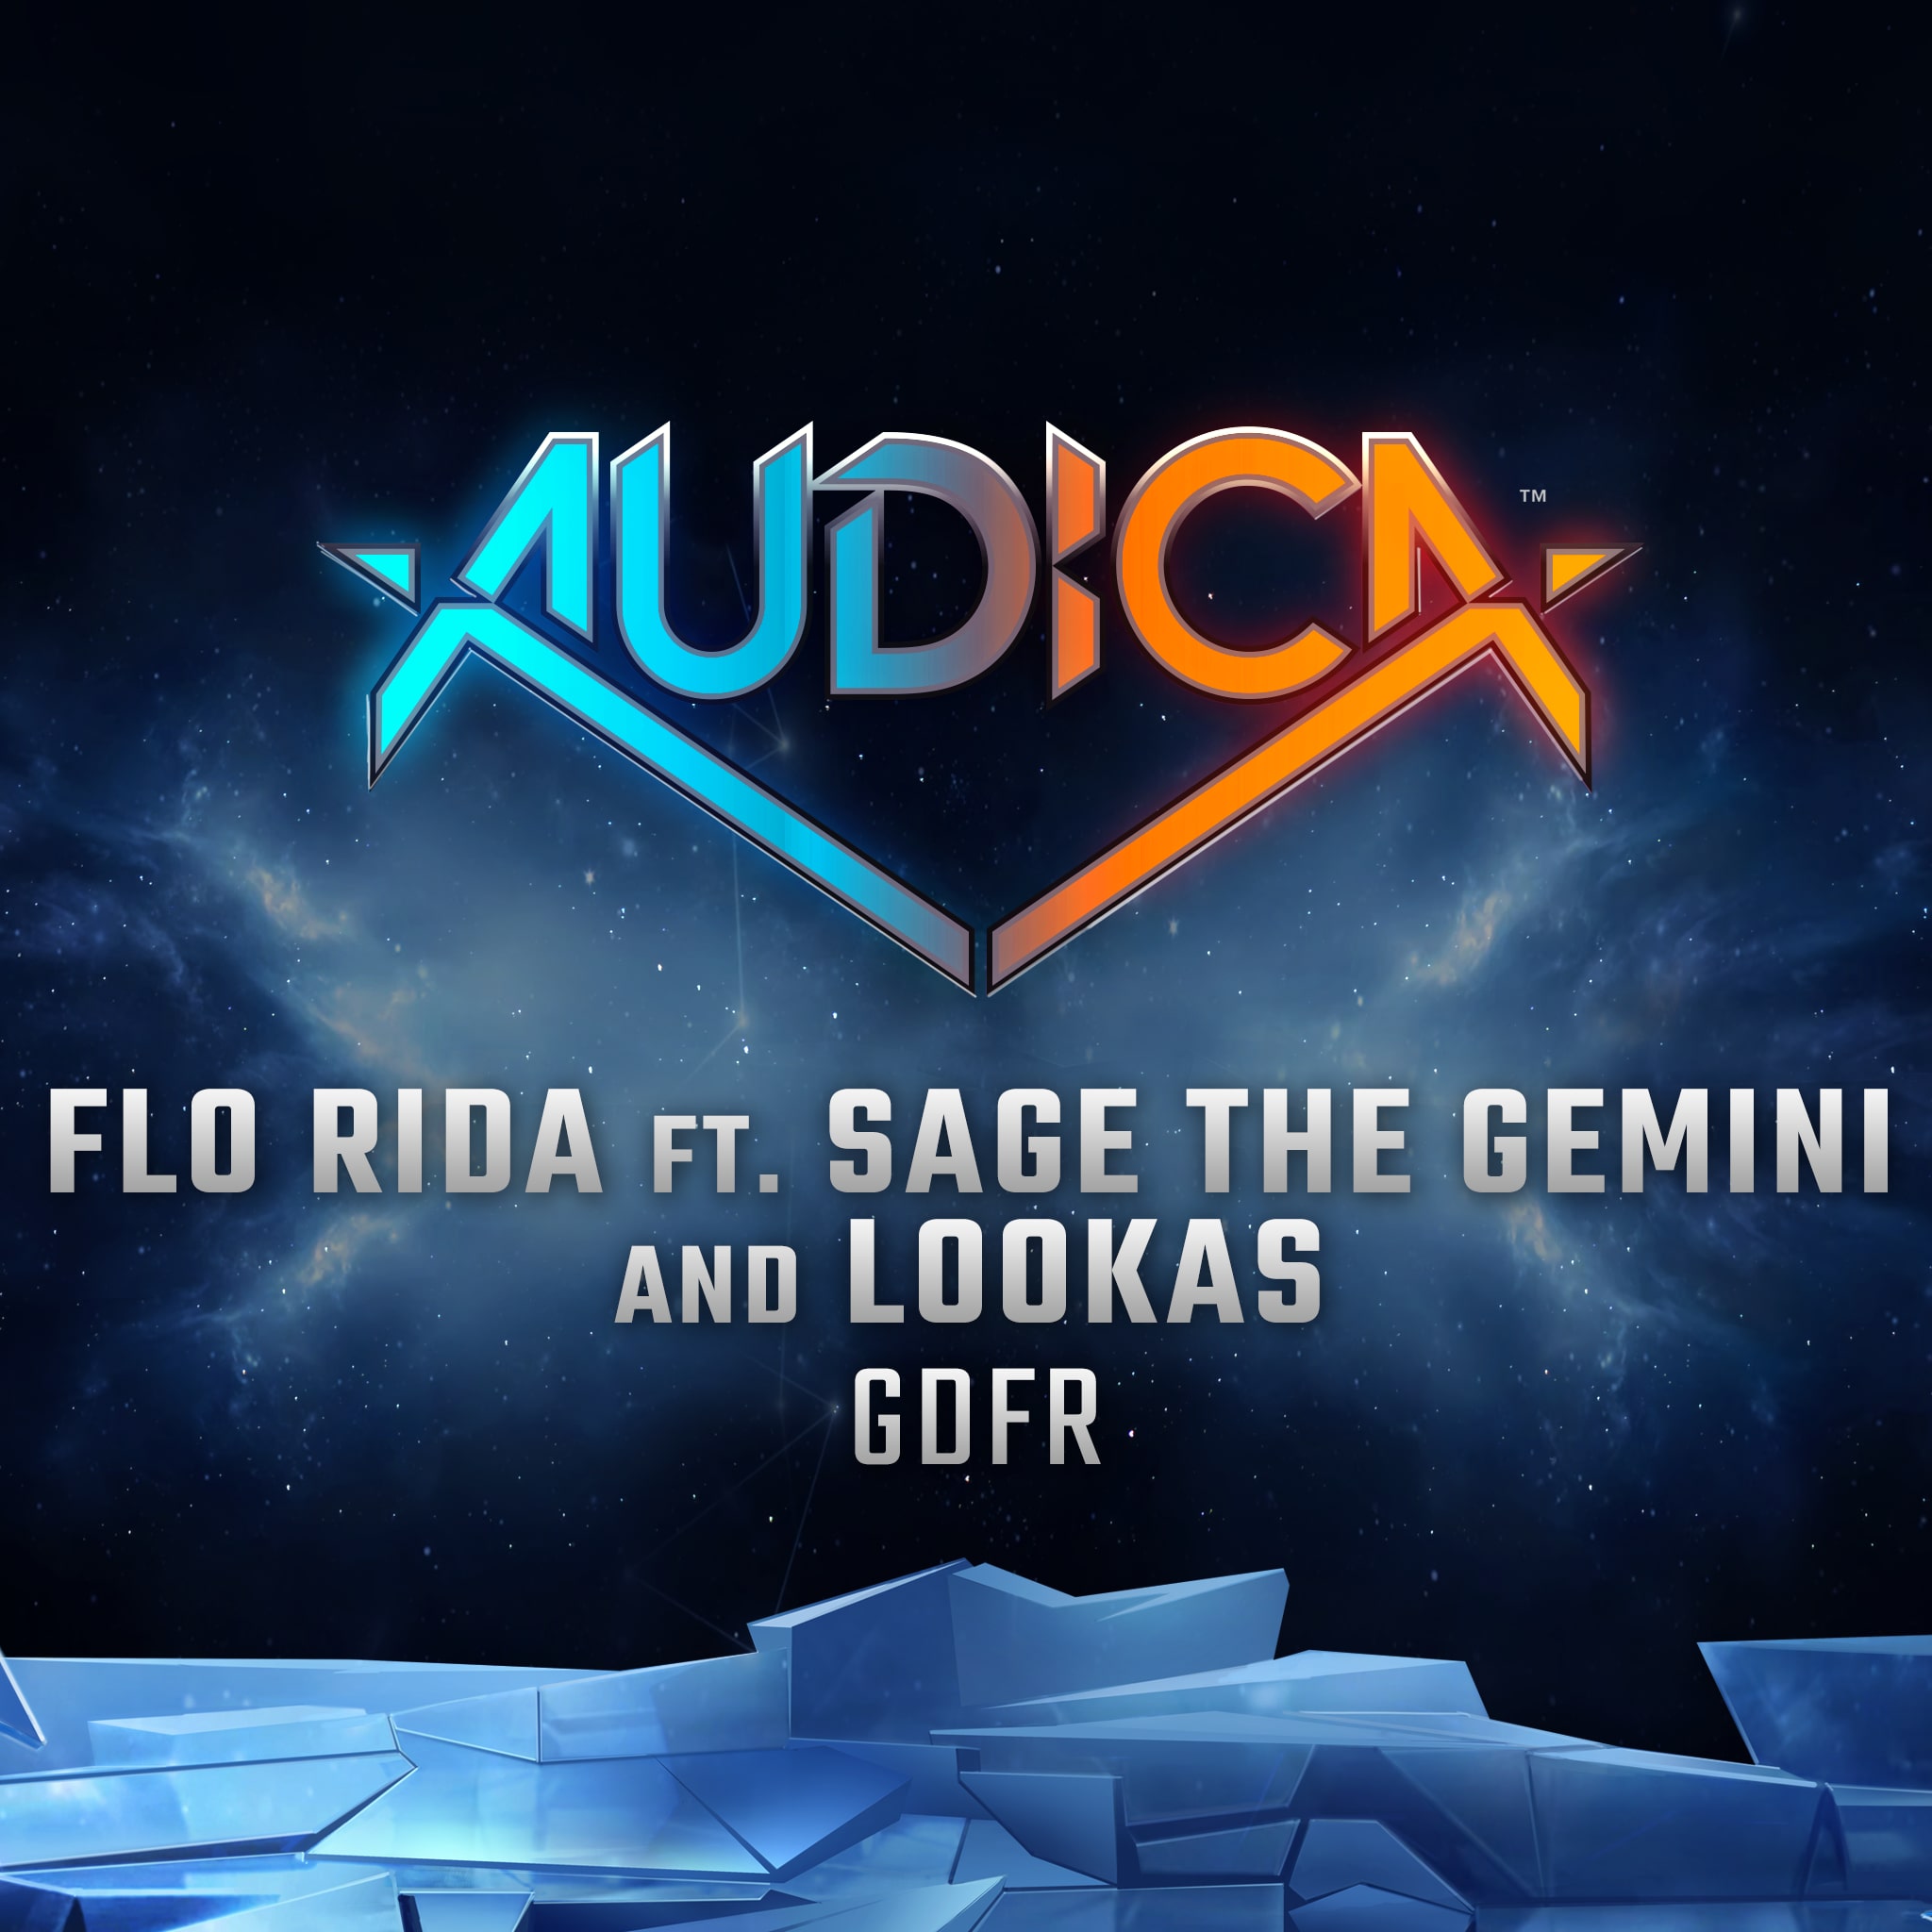 'GDFR' - Flo Rida ft. Sage The Gemini and Lookas